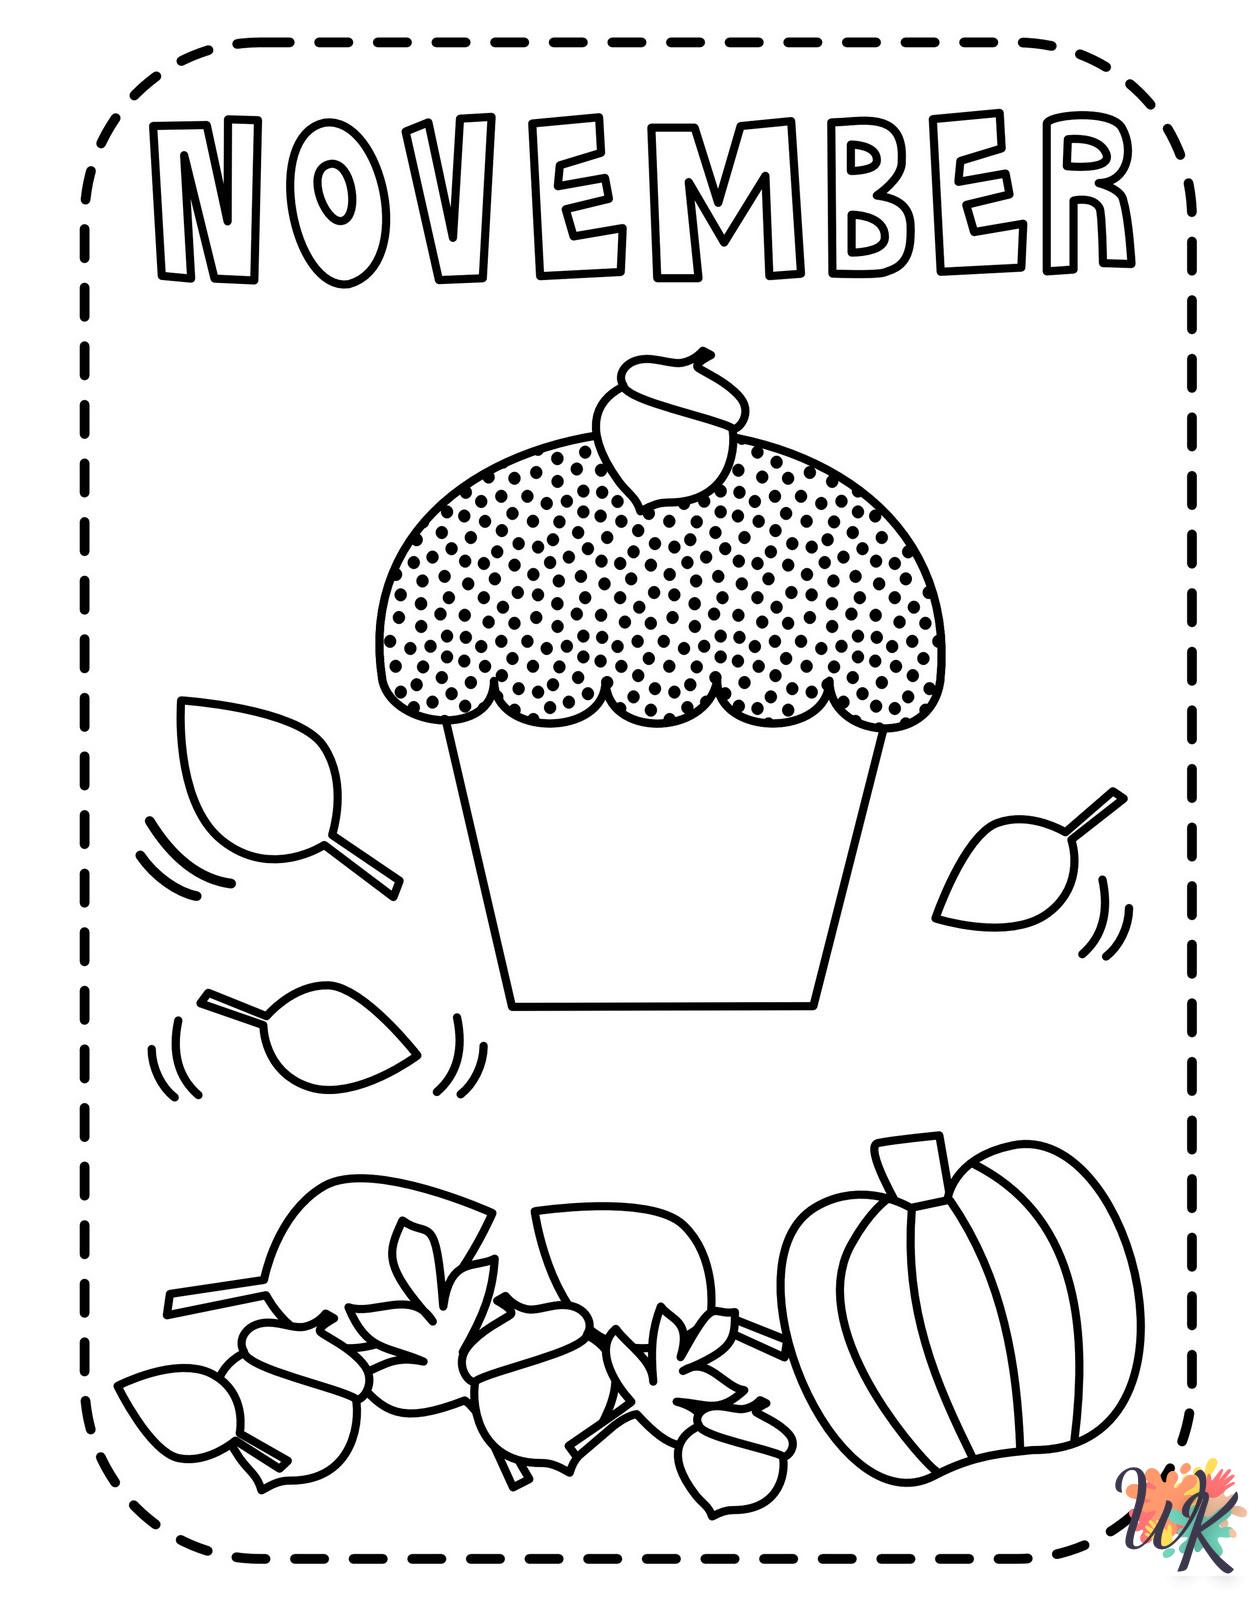 November themed coloring pages